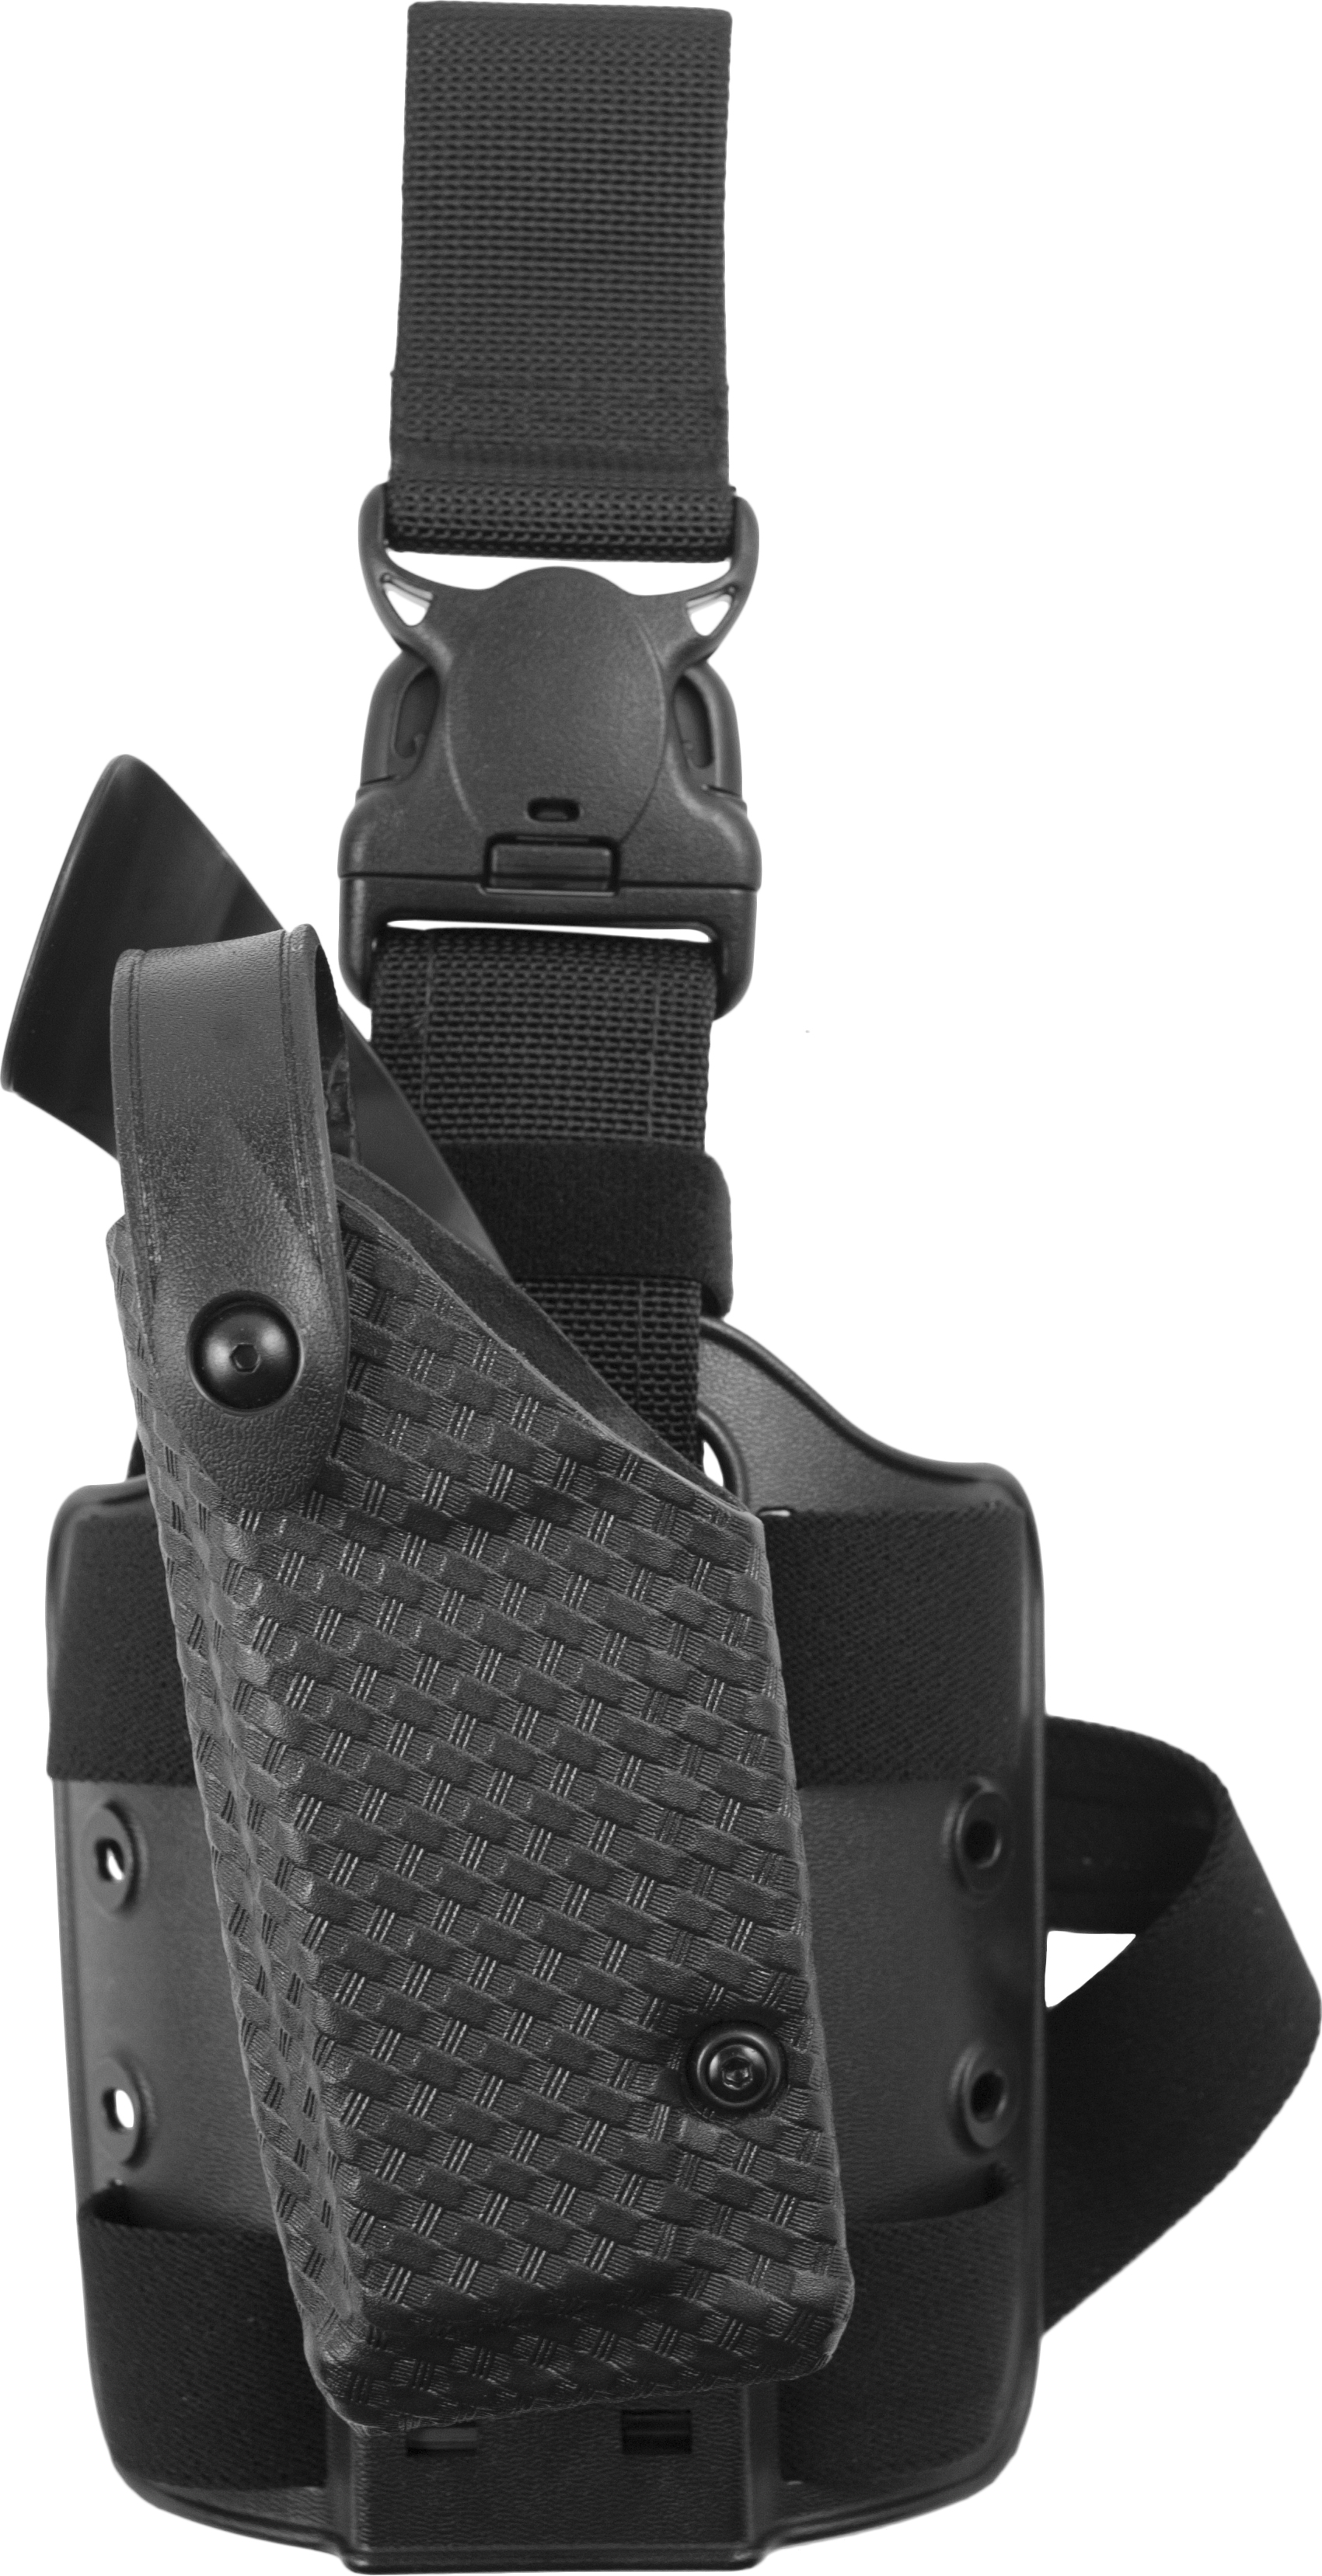 Safariland Model 6005 SLS Tactical Holster with Quick-Release Leg